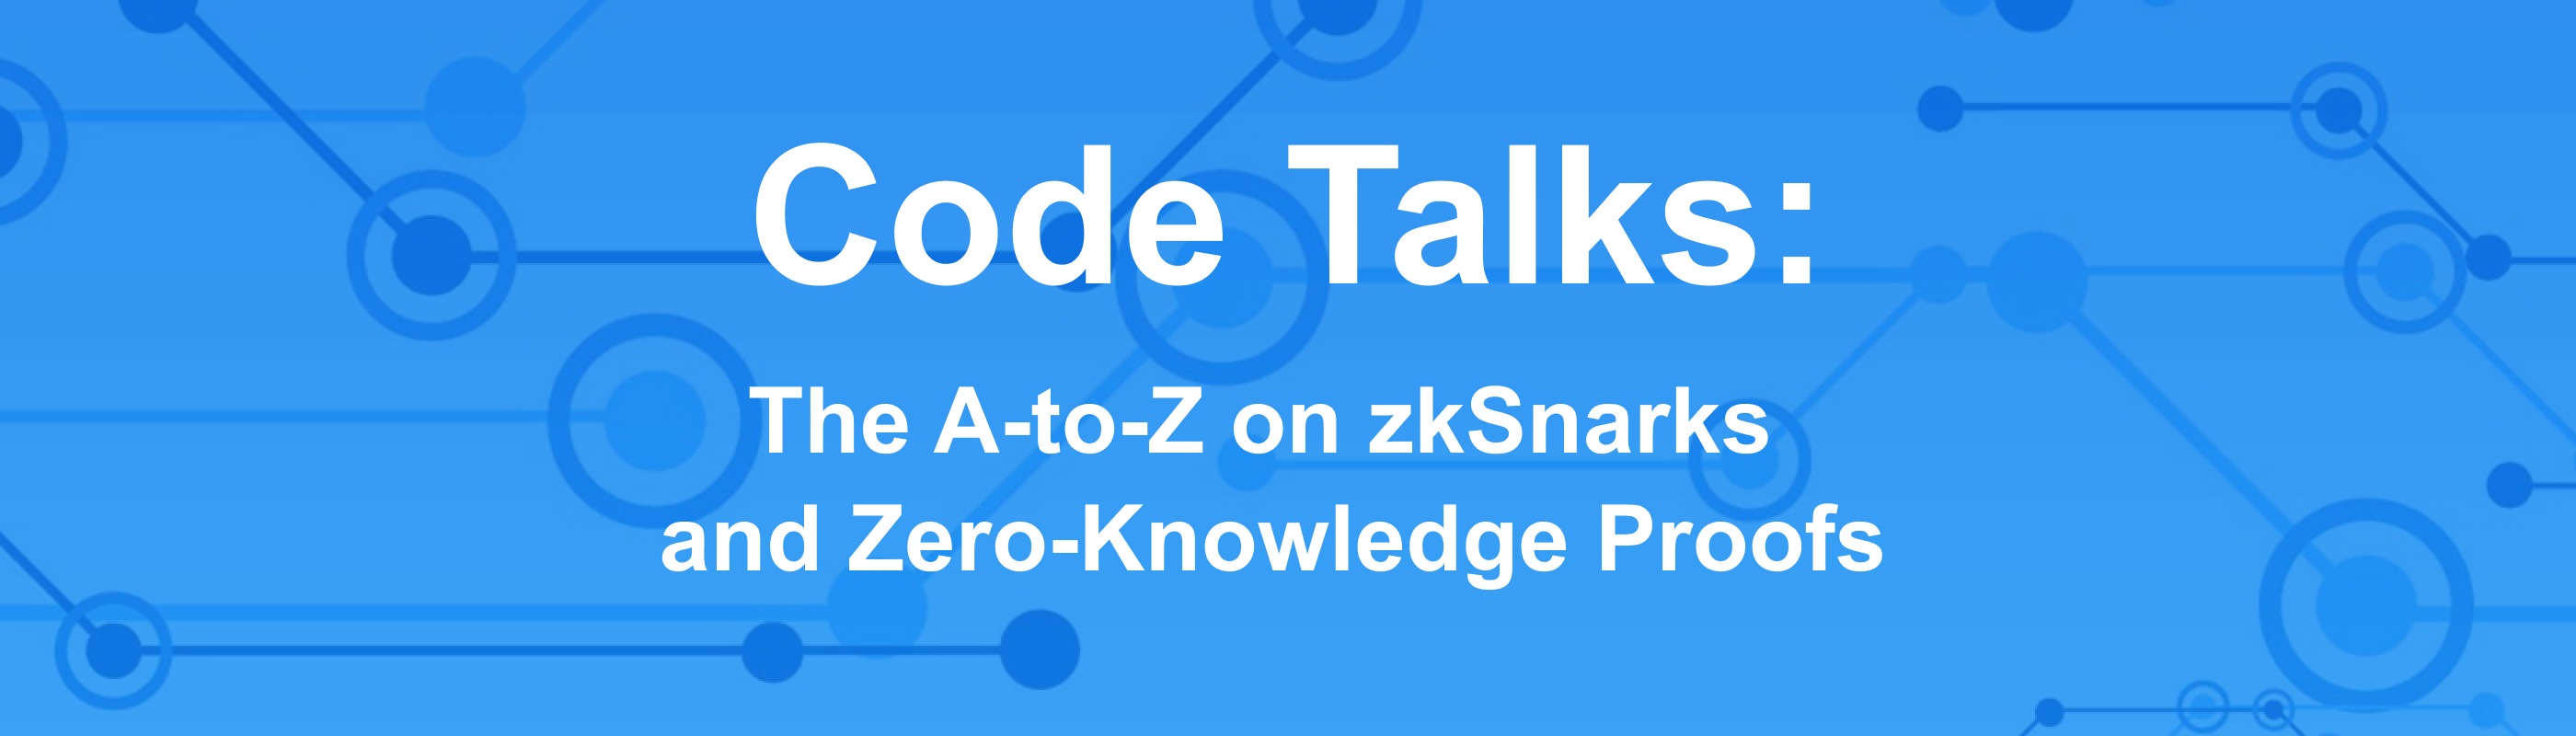 Code Talks: The A-to-Z on zkSnarks and Zero-Knowledge Proof